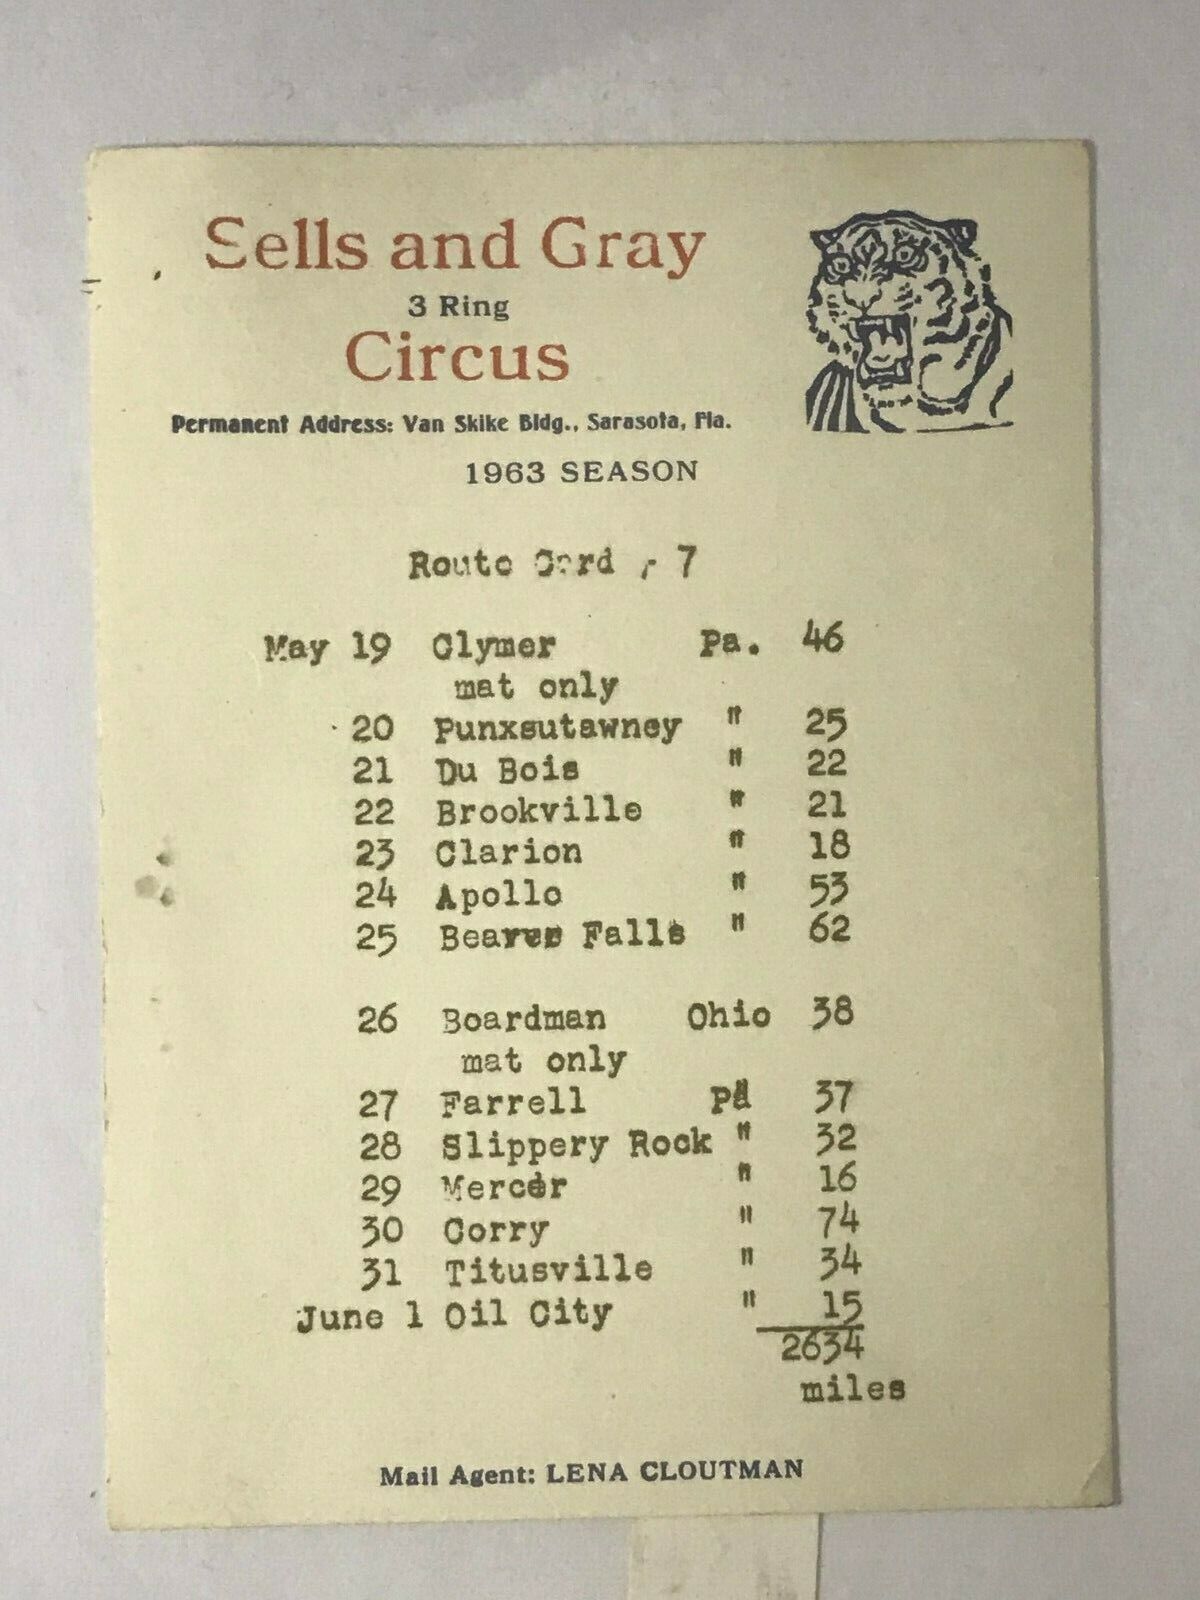 1963 Sells and Gray 3 Ring Circus Official Route Card No. 7